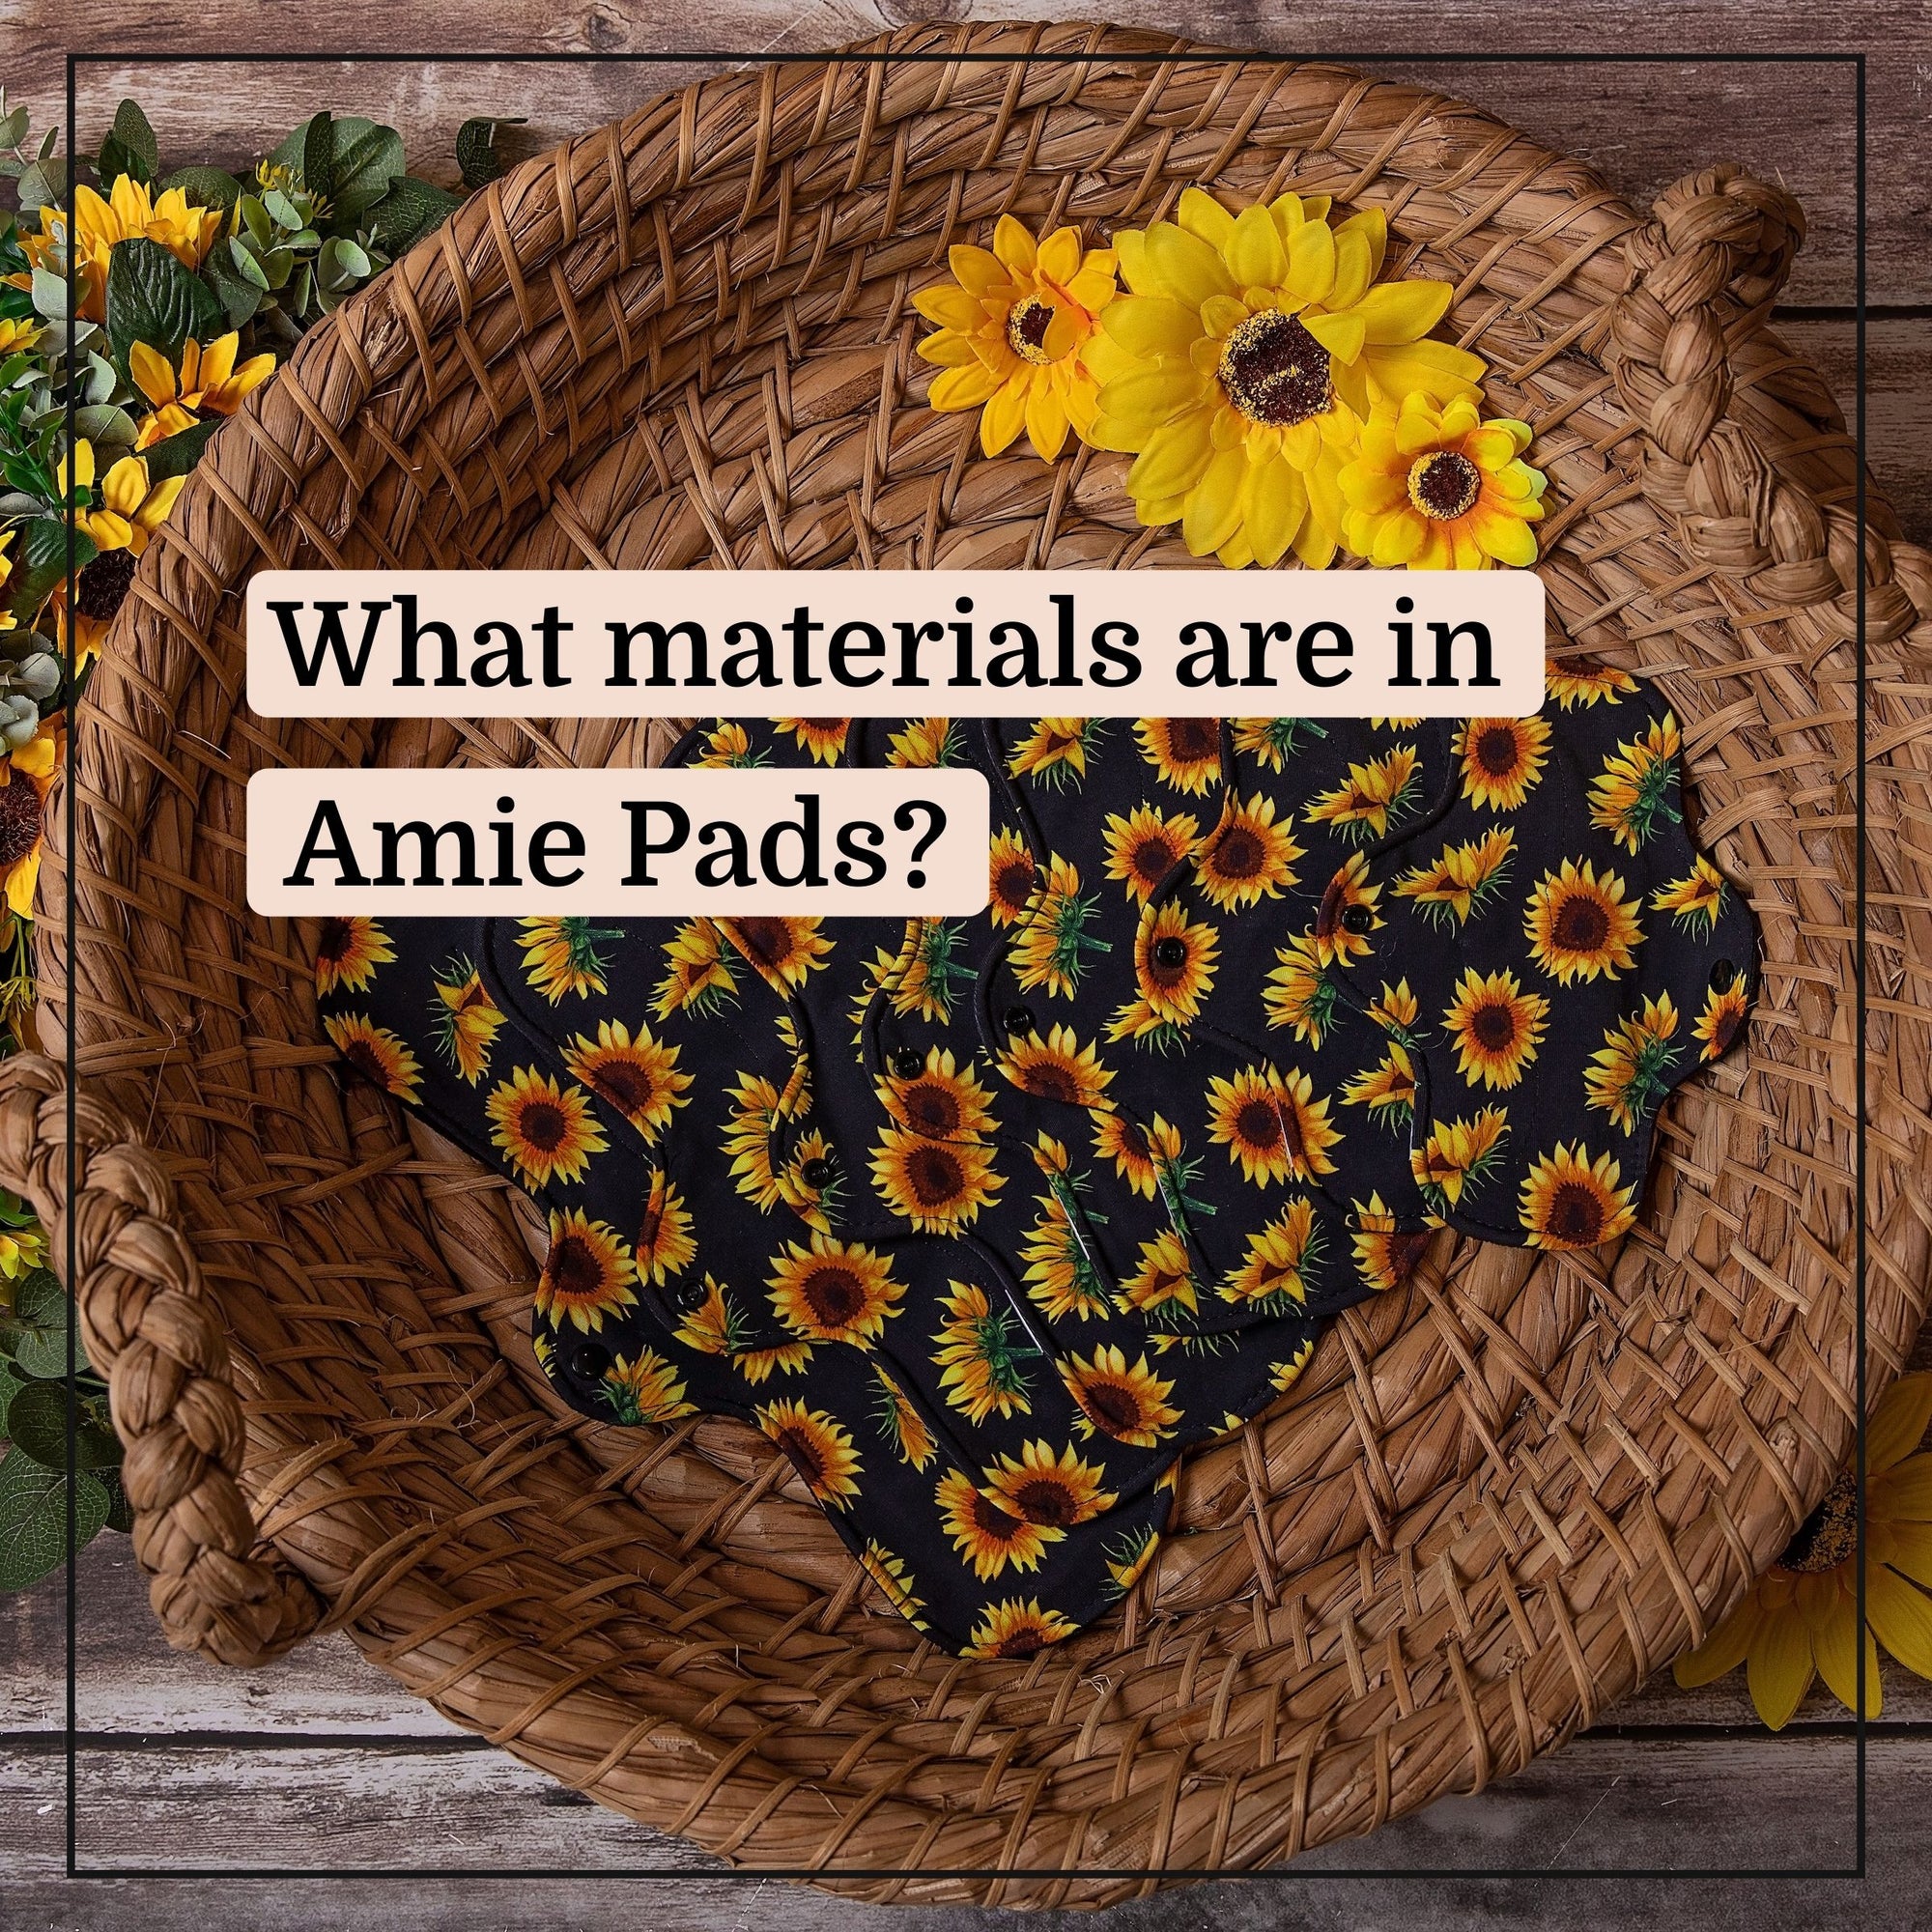 What materials are in Amie Pads?